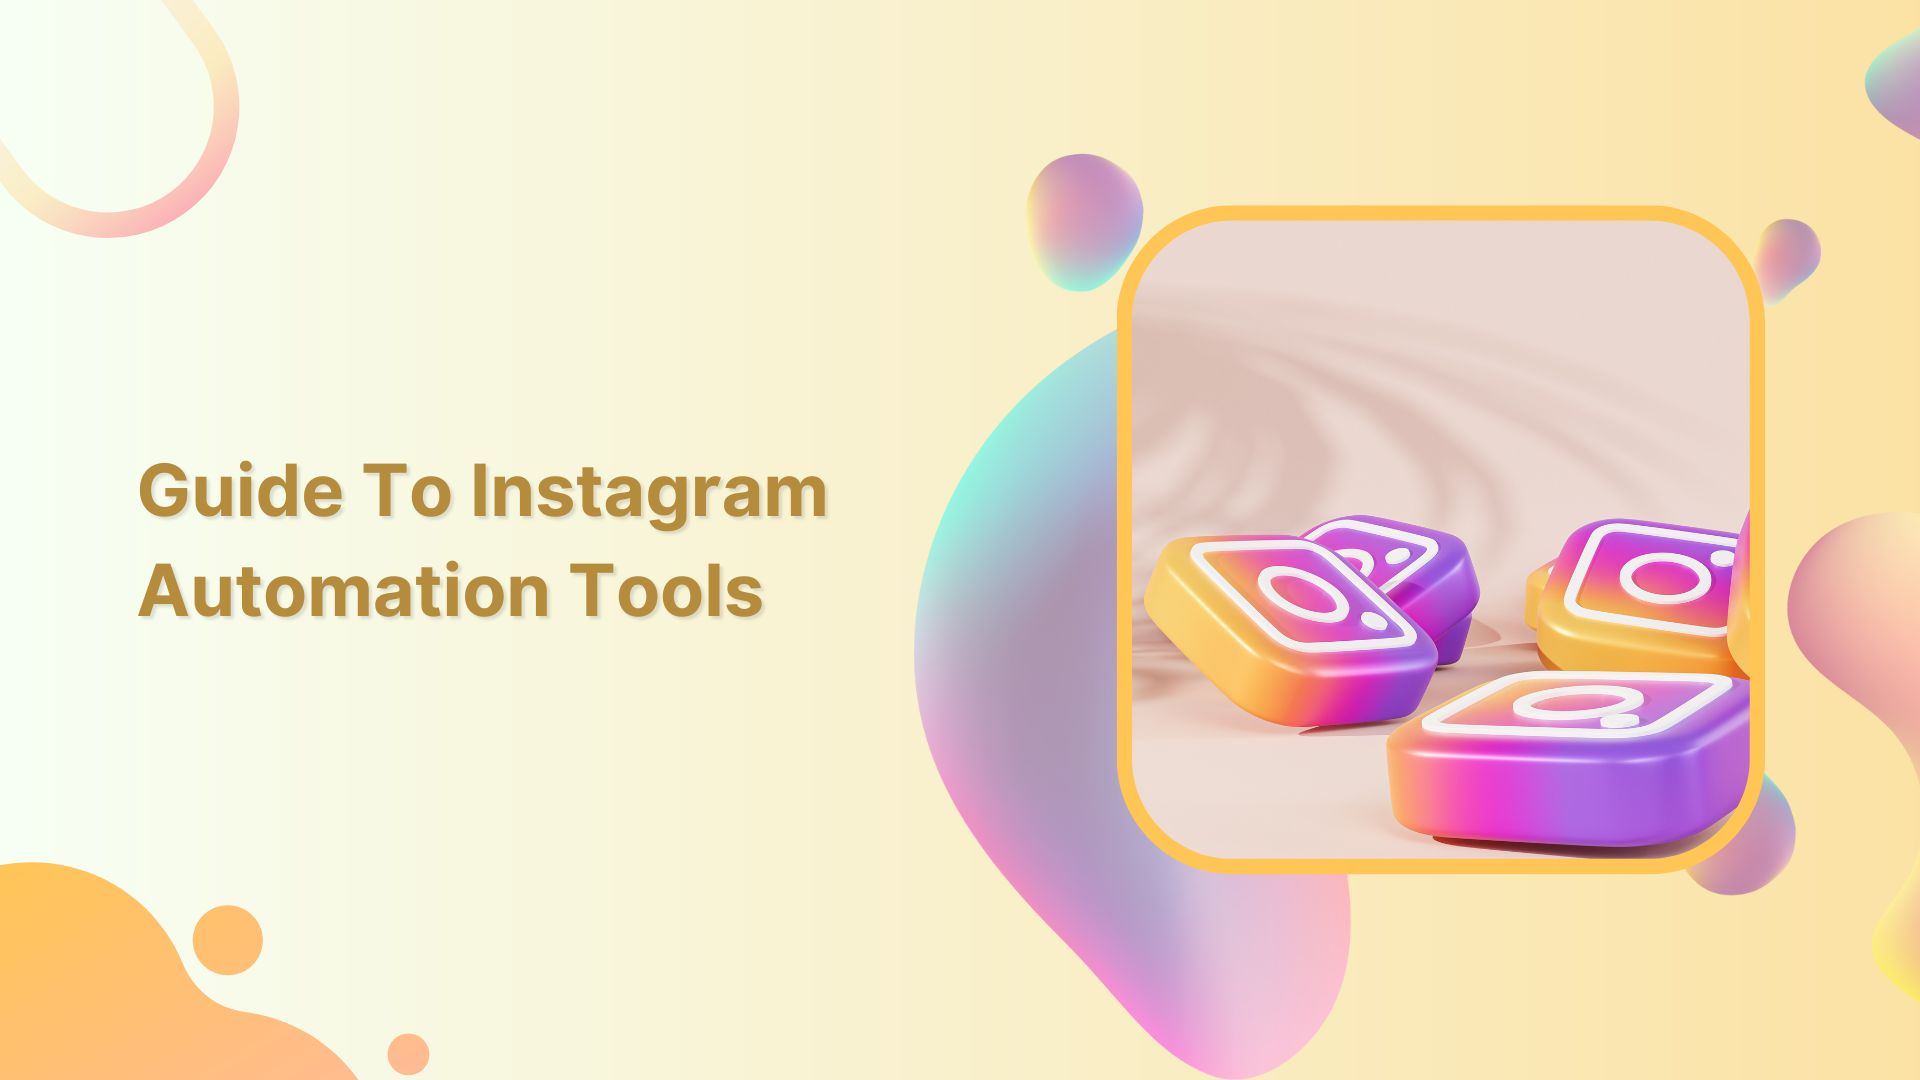 Get More Done in Less Time: Guide to Instagram Automation Tools